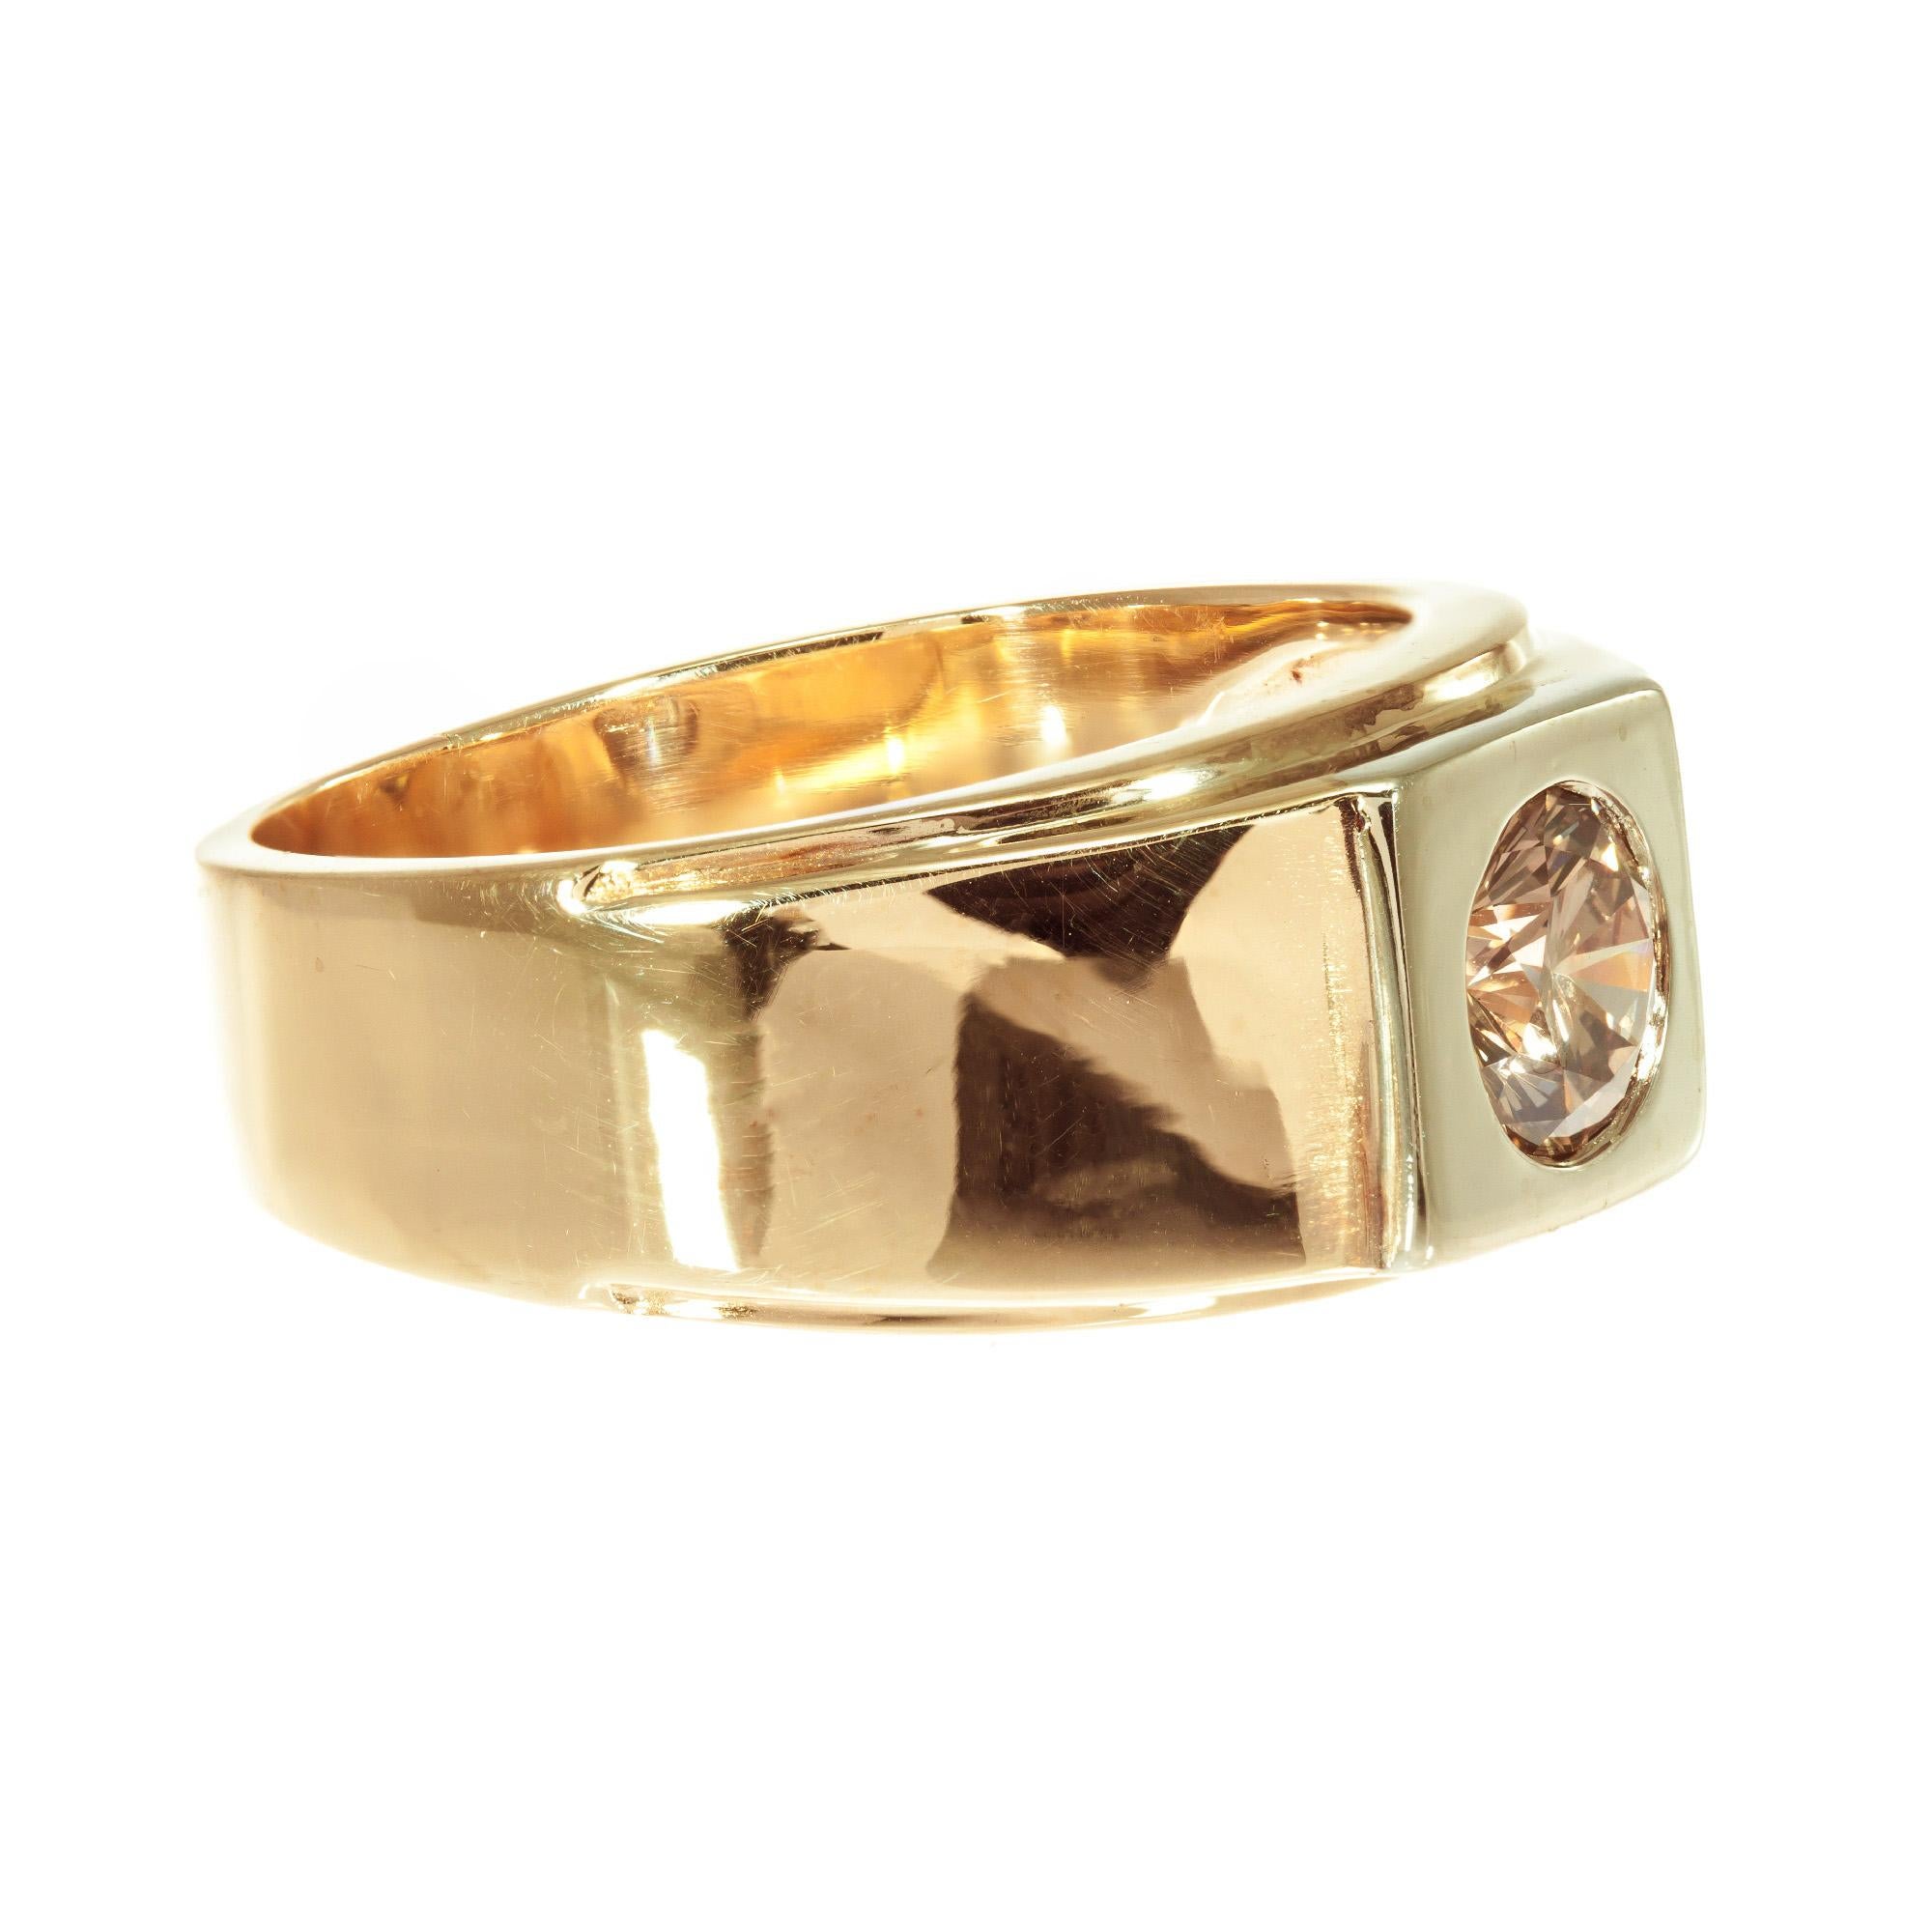 Brown diamond band ring. Simple classic yellow gold band setting with 14k white gold top. Suitable for a man or a women. 

1 round brilliant cut fancy orange brown VS2 diamond, Approximate .65ct. EGL certificate #US 400122261D
Size 8 and sizable